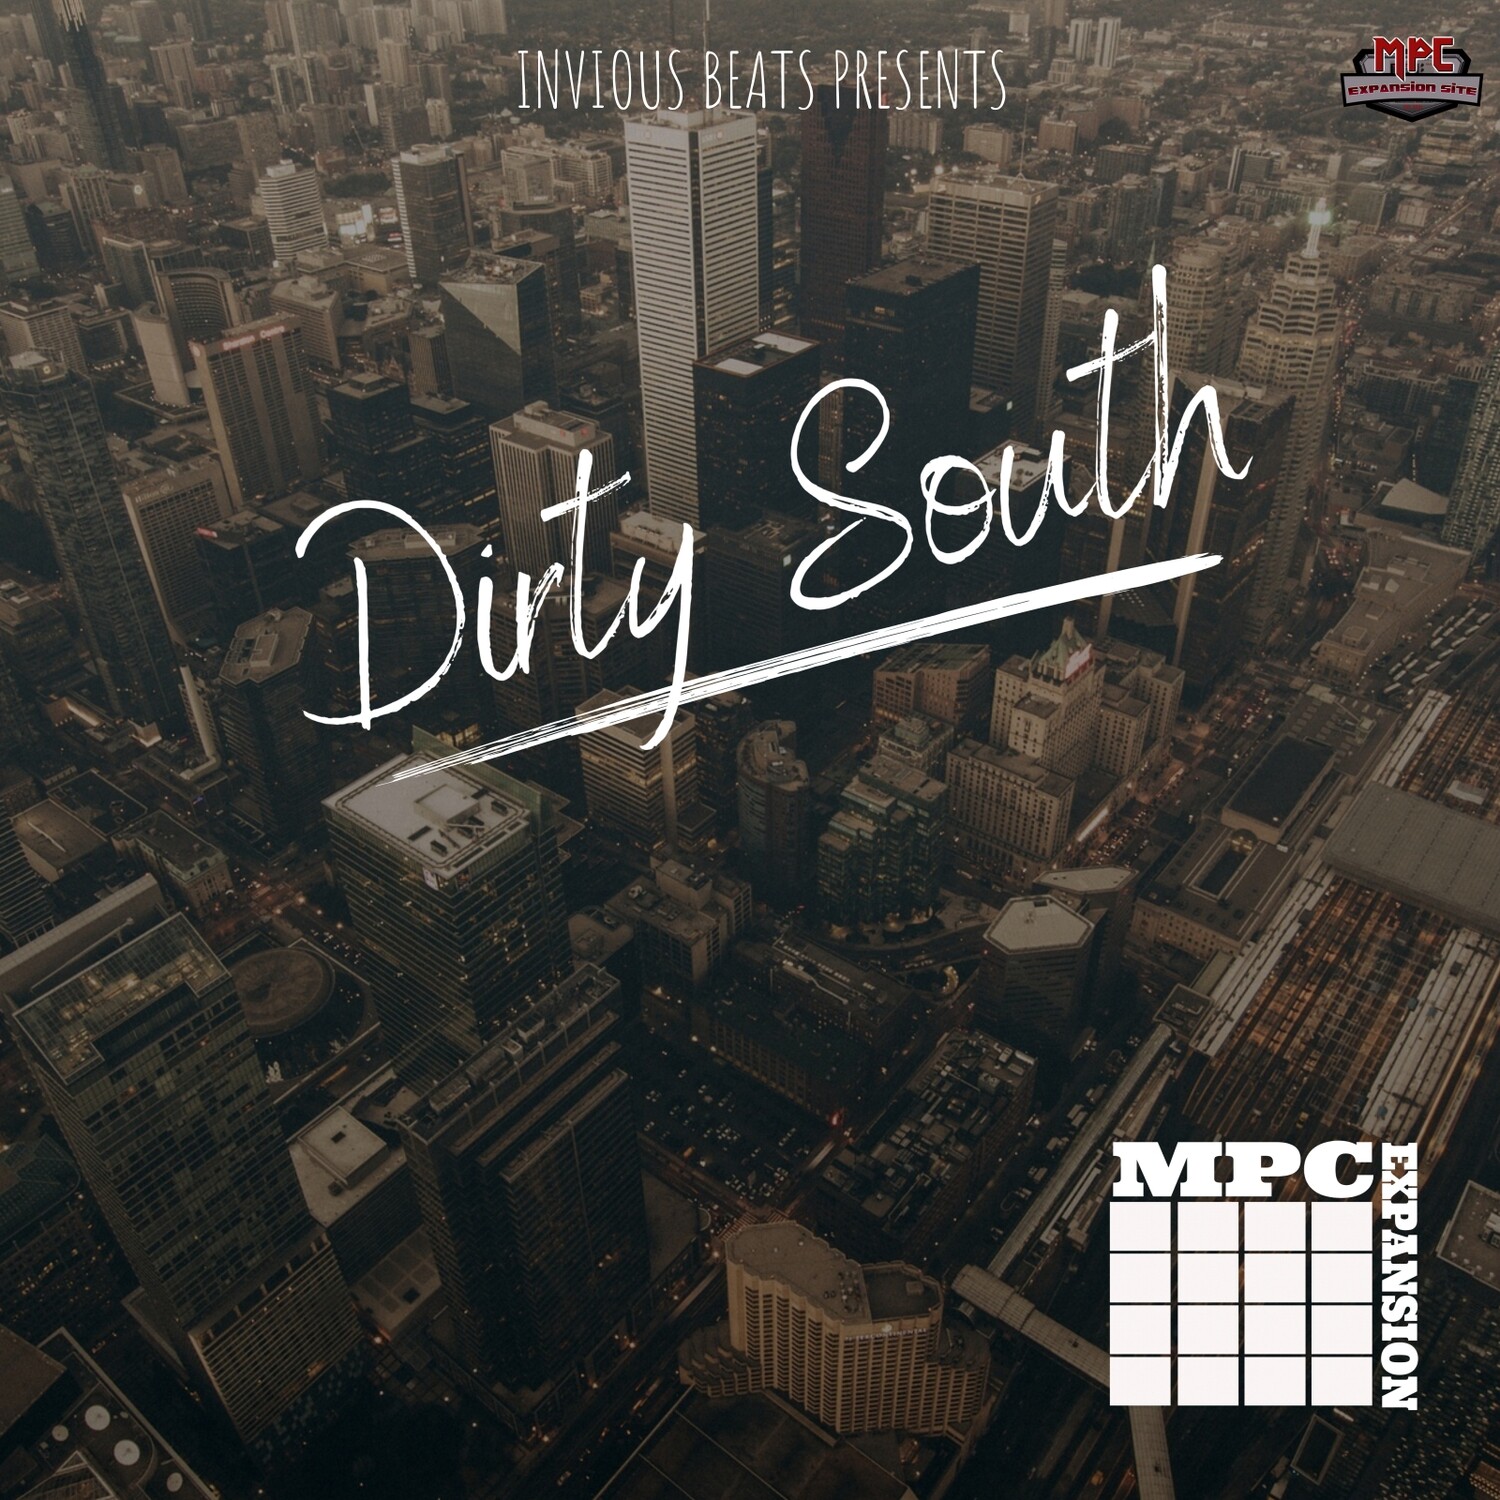 MPC EXPANSION 'DIRTY SOUTH' by INVIOUS